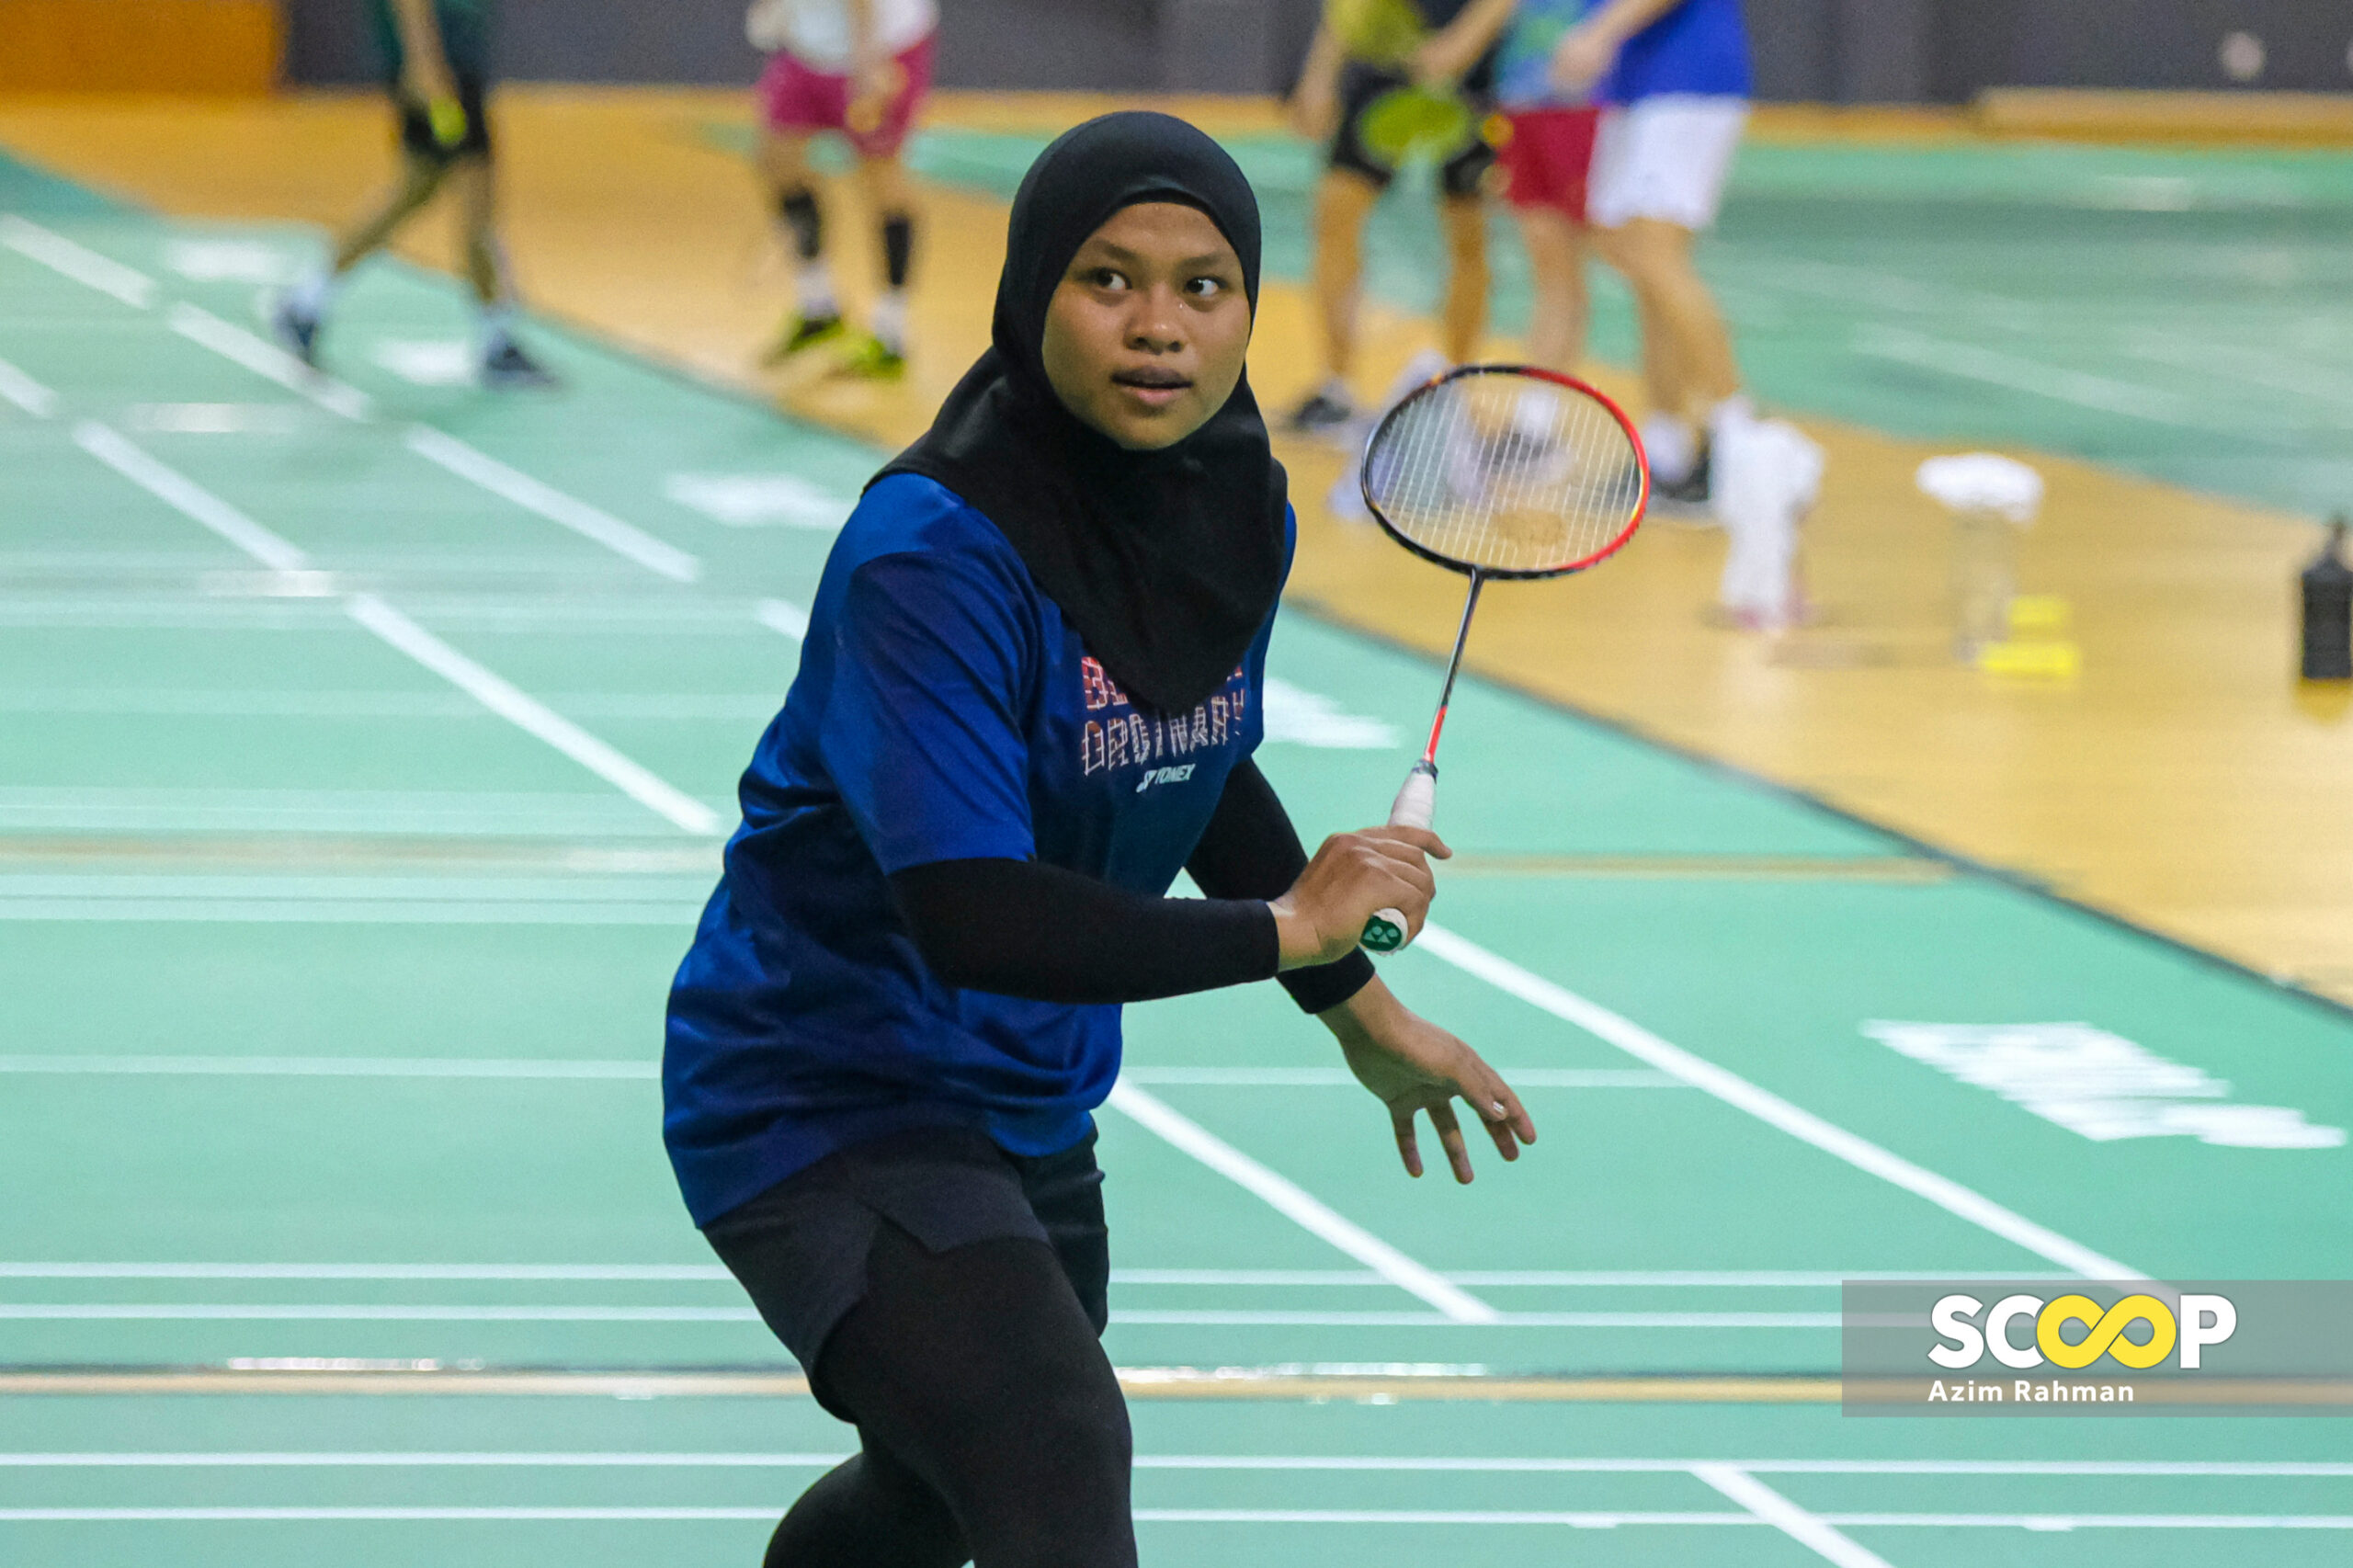 Sparring with male shuttlers pays dividends for Nurshuhaini ahead of BATC